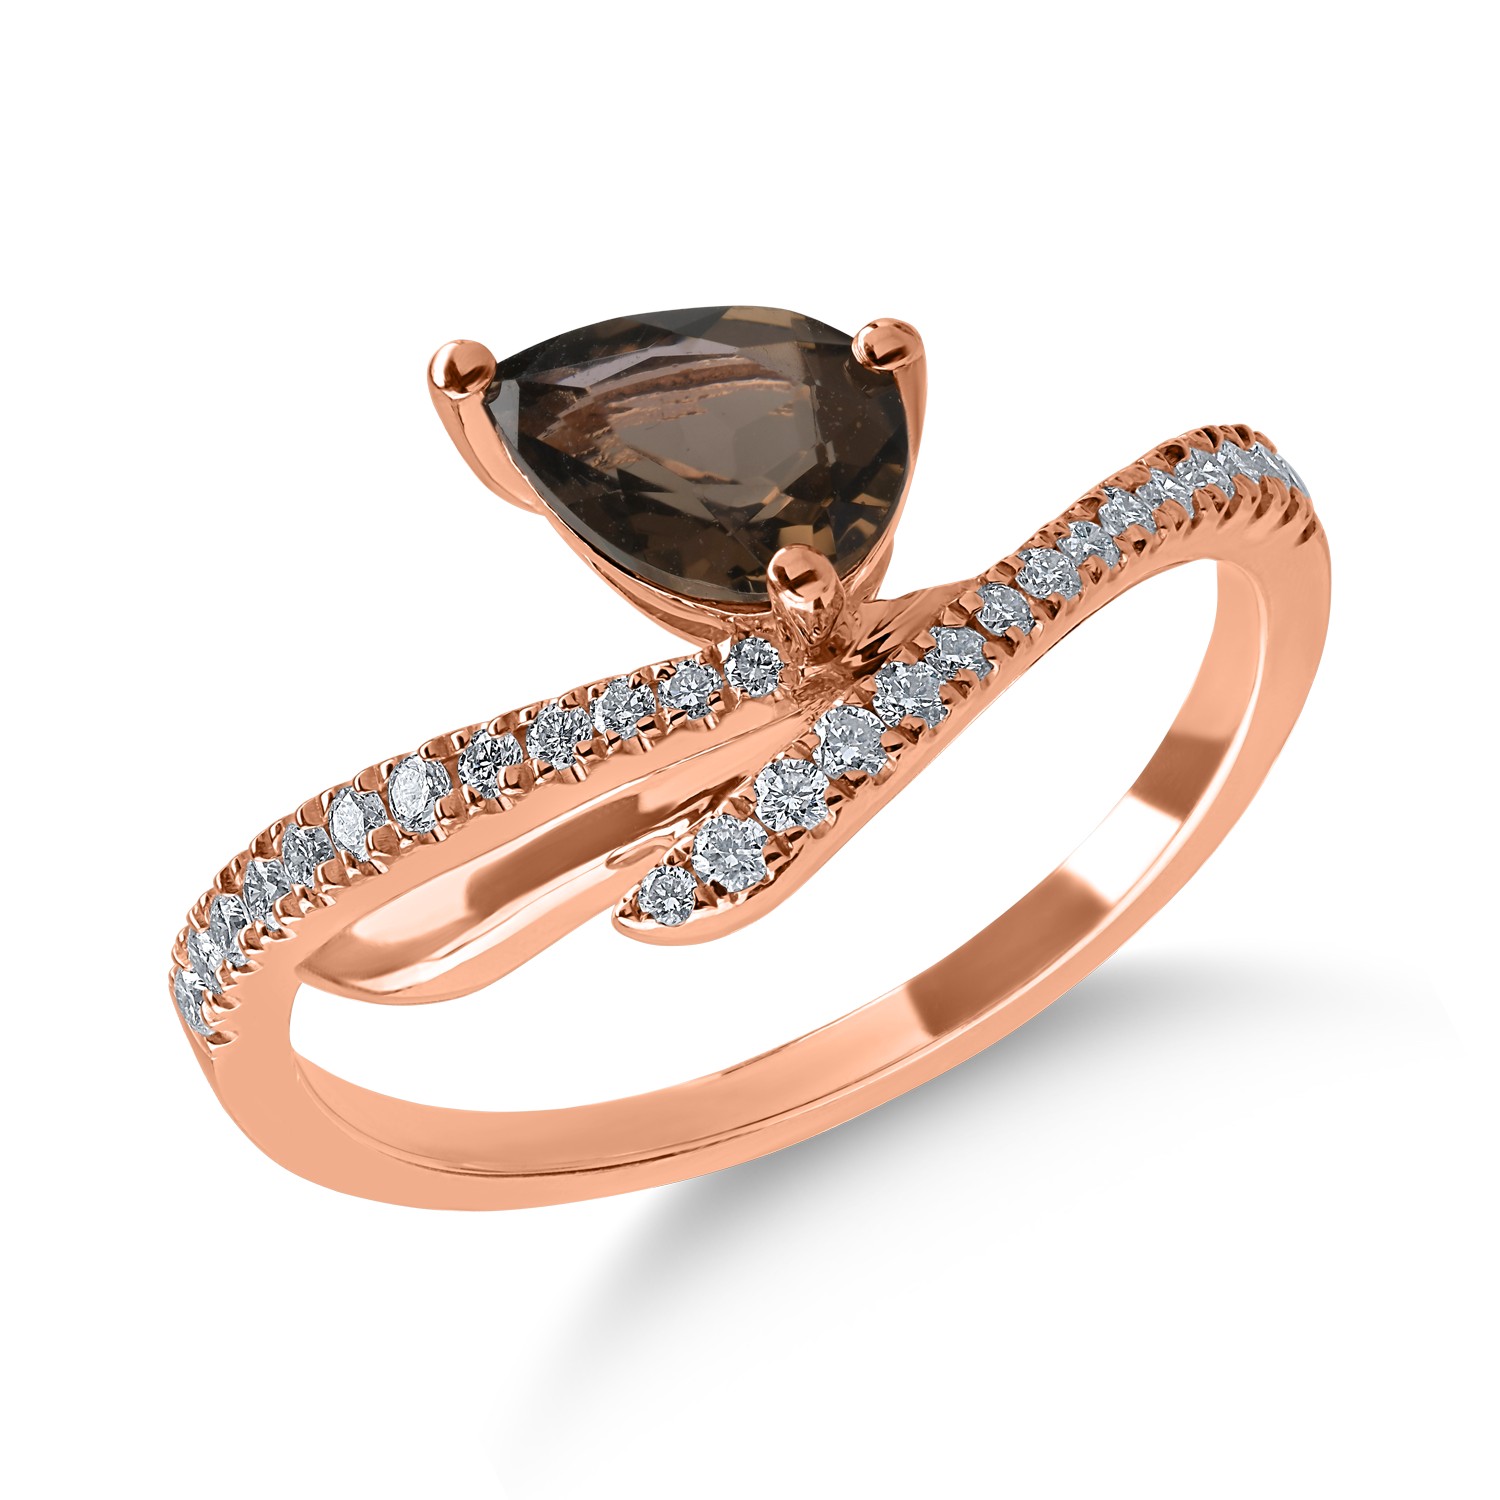 Rose gold ring with 0.58ct smoky quartz and 0.177ct diamonds